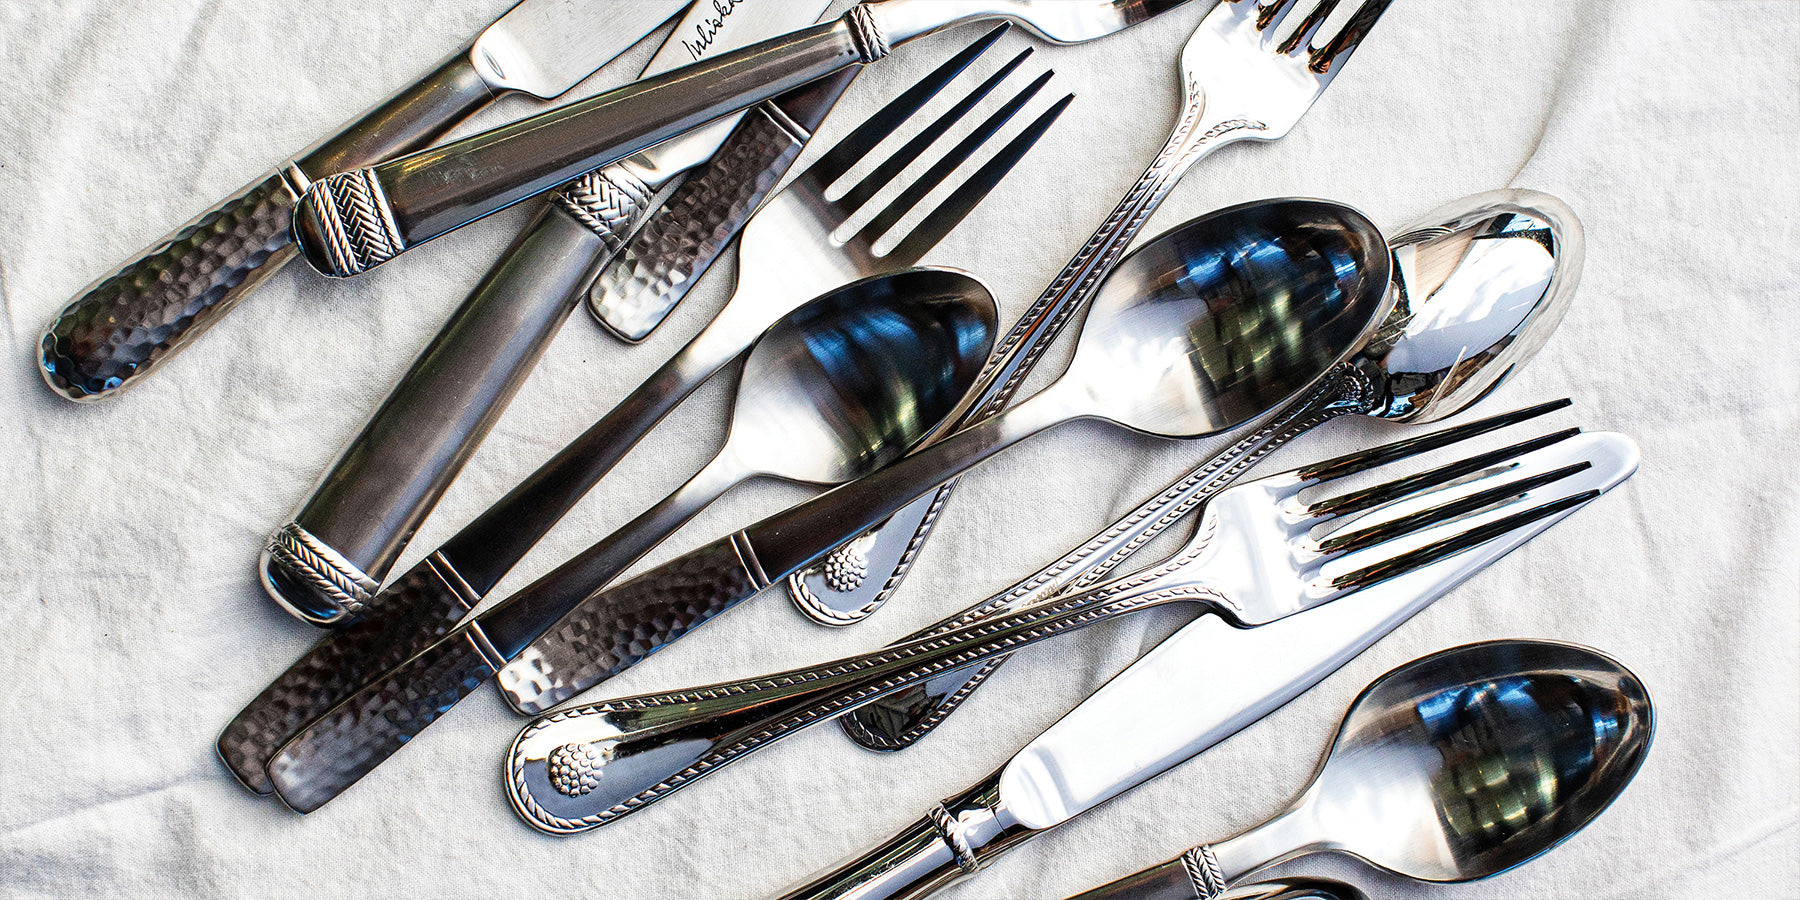 Third, select your flatware. Many people choose one stainless steel collection to use all of the time, from everyday casual to formal occasions.